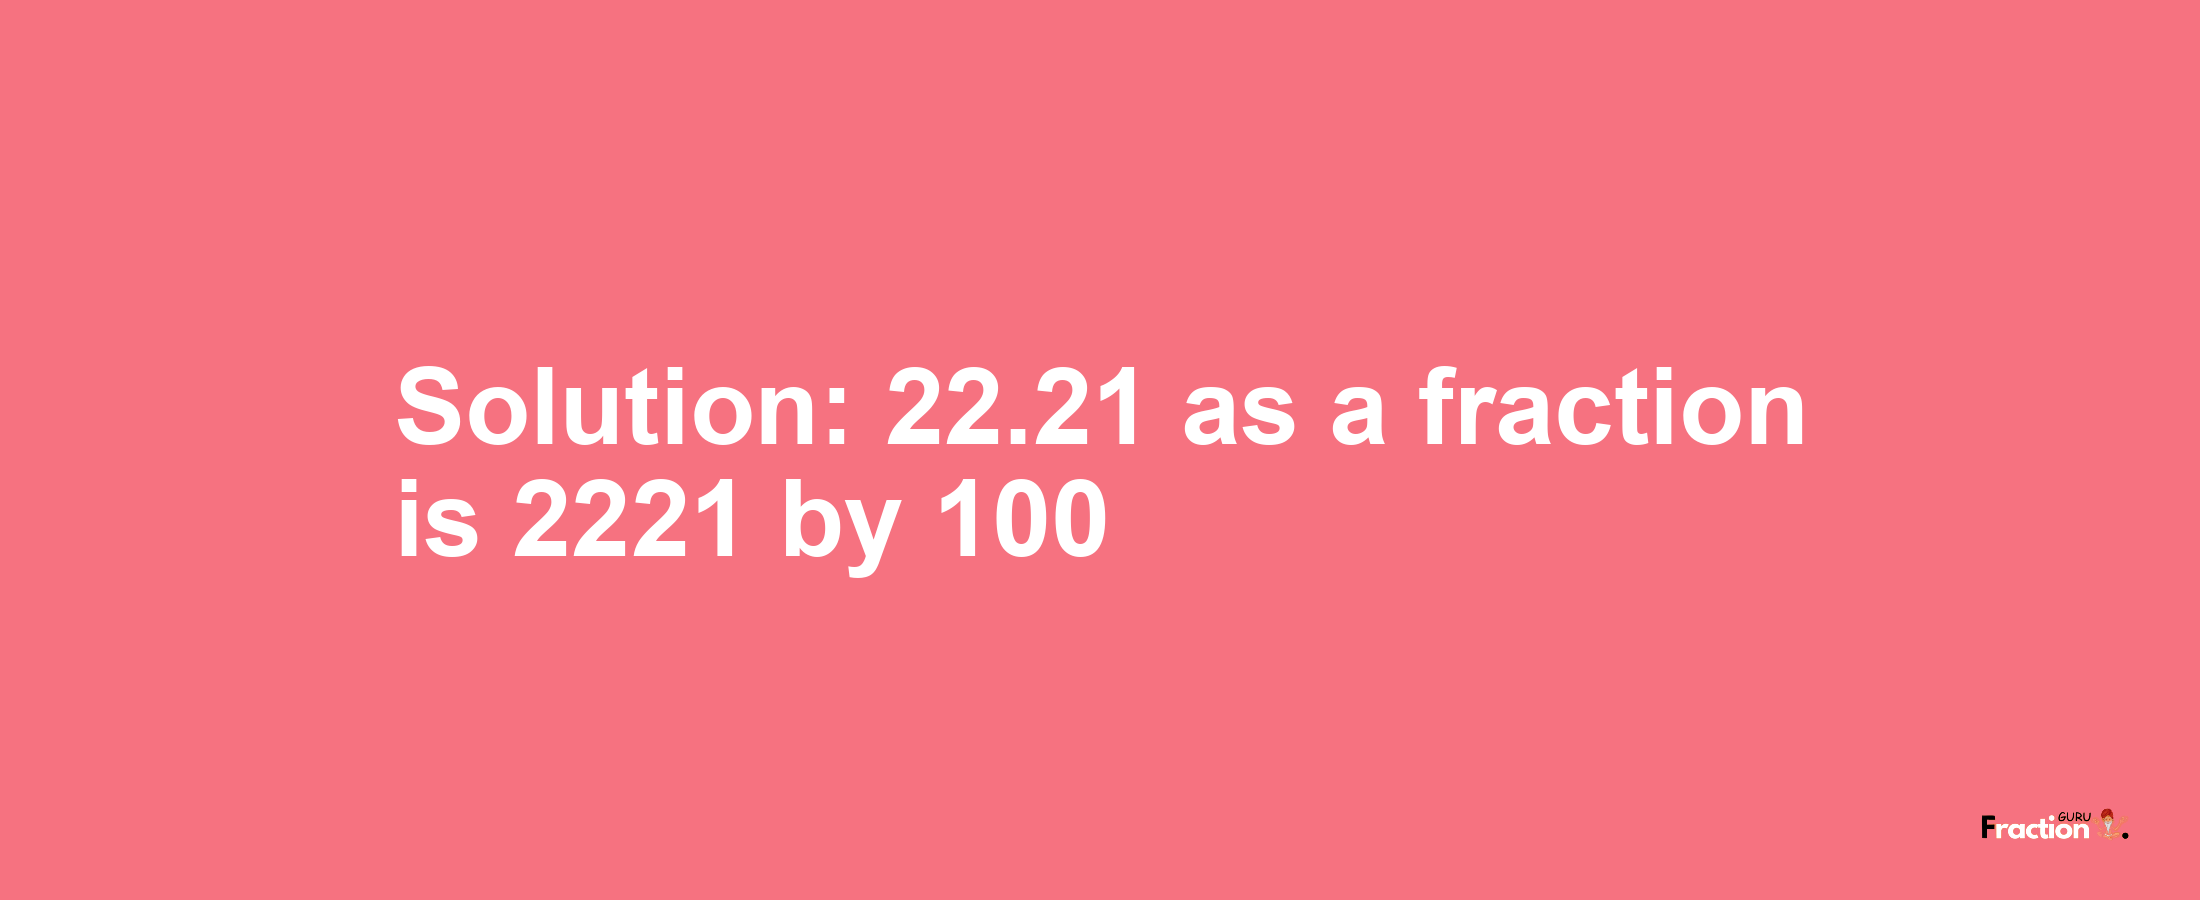 Solution:22.21 as a fraction is 2221/100